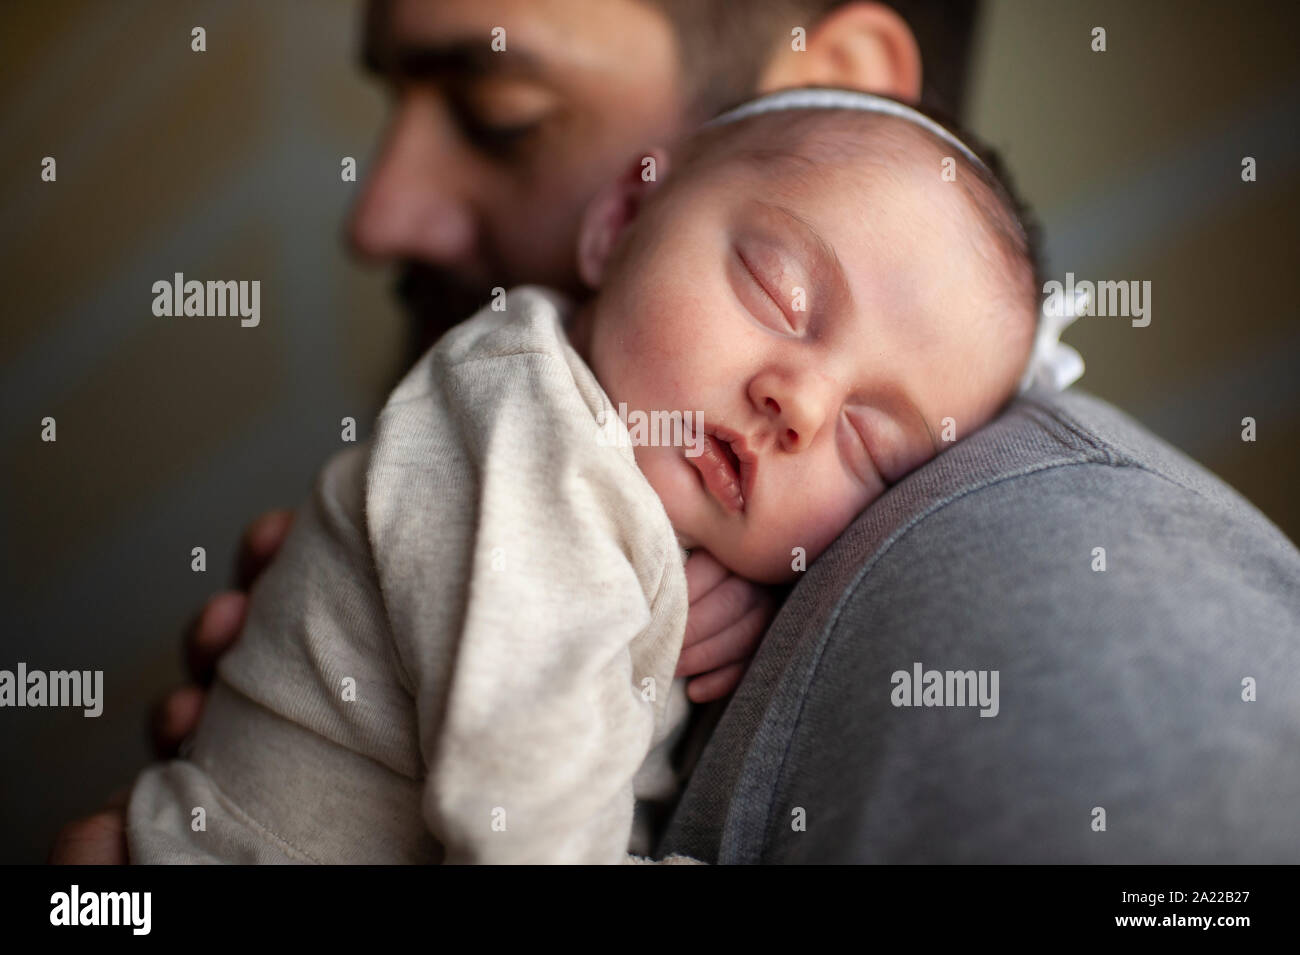 Close up of newborn baby's face sleeping on father's shoulder at home Stock Photo